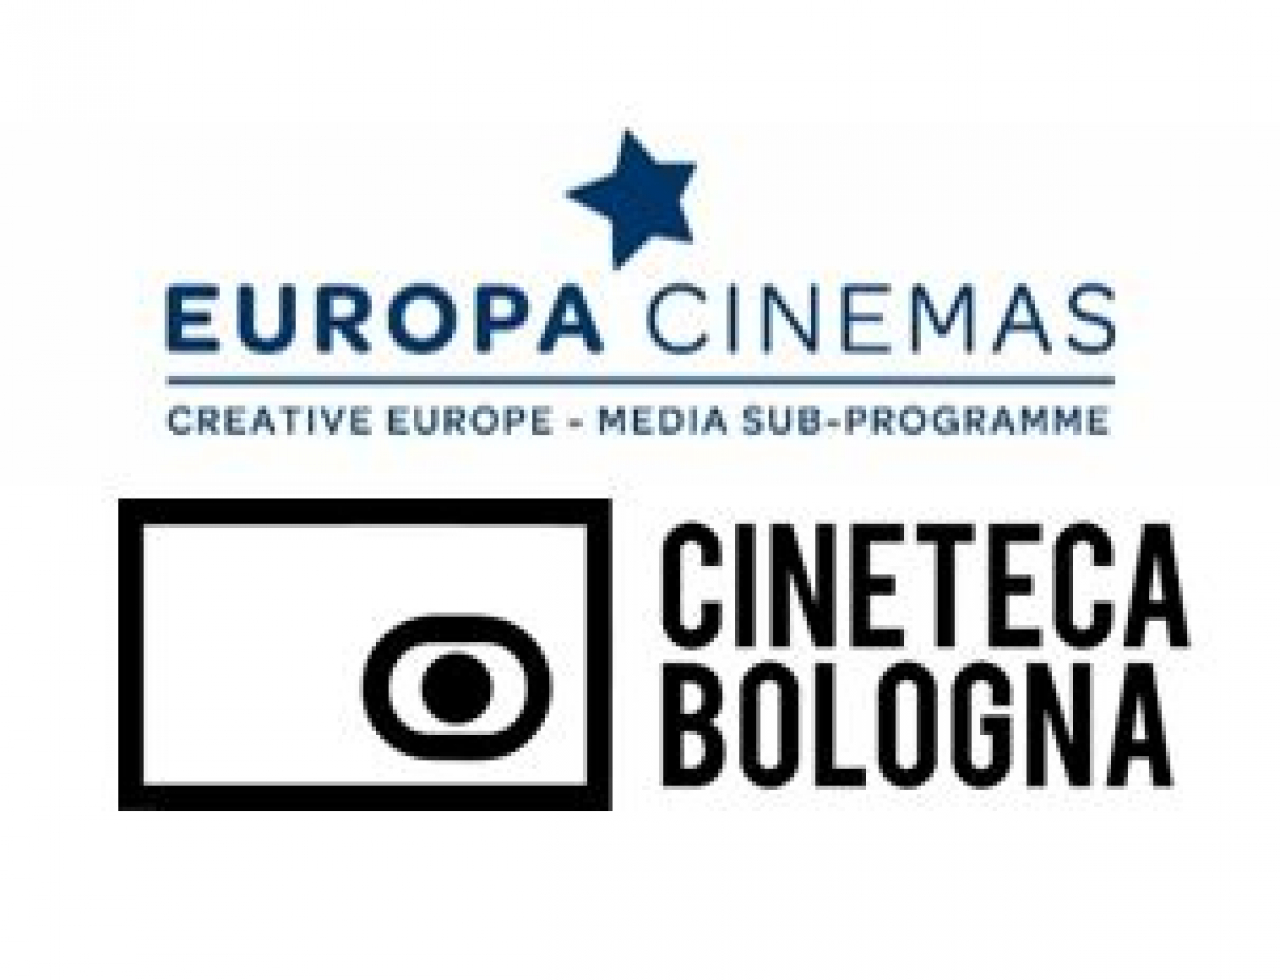 Europa Cinemas Audience Development &amp; Innovation Lab - Building Inclusion &amp; Reaching Out to New Audiences